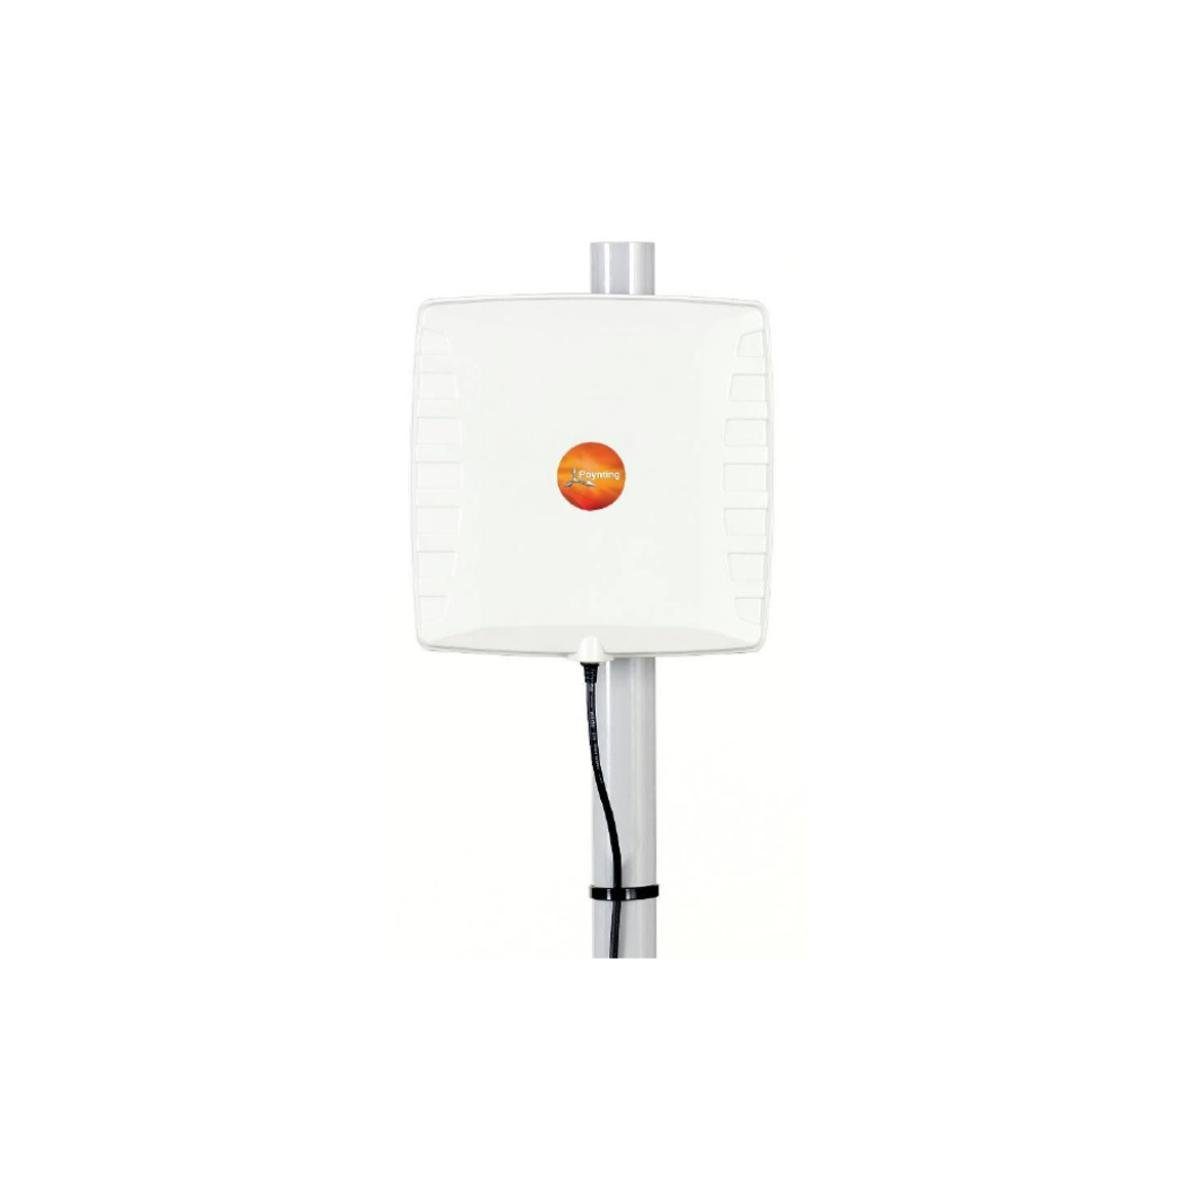 - WLAN-Antenne PATCH-26 Poynting Lineare A-PATCH-0026 RFID 860... Patch-Antenne,